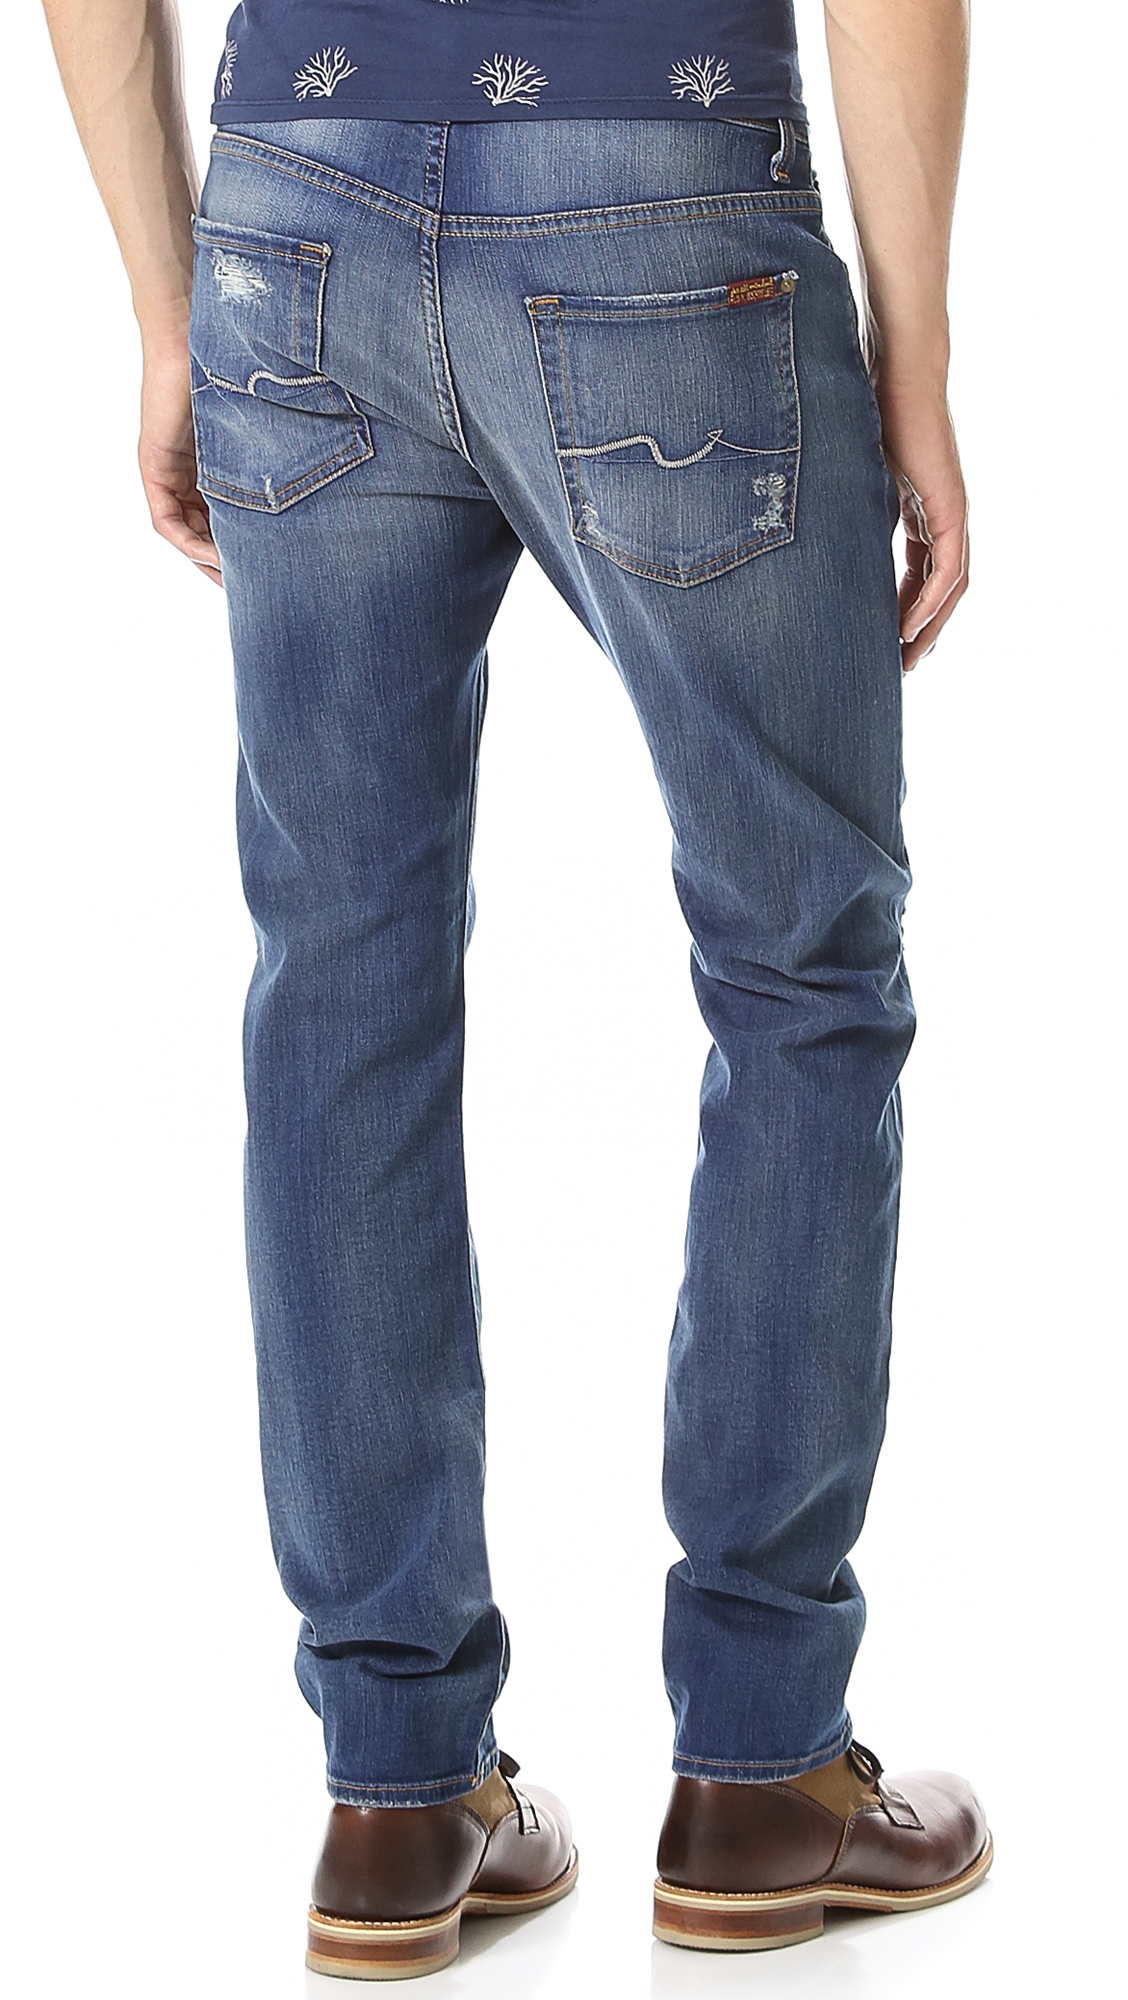 7 For All Mankind The Straight Vintage Wash Jeans in Blue for Men - Lyst